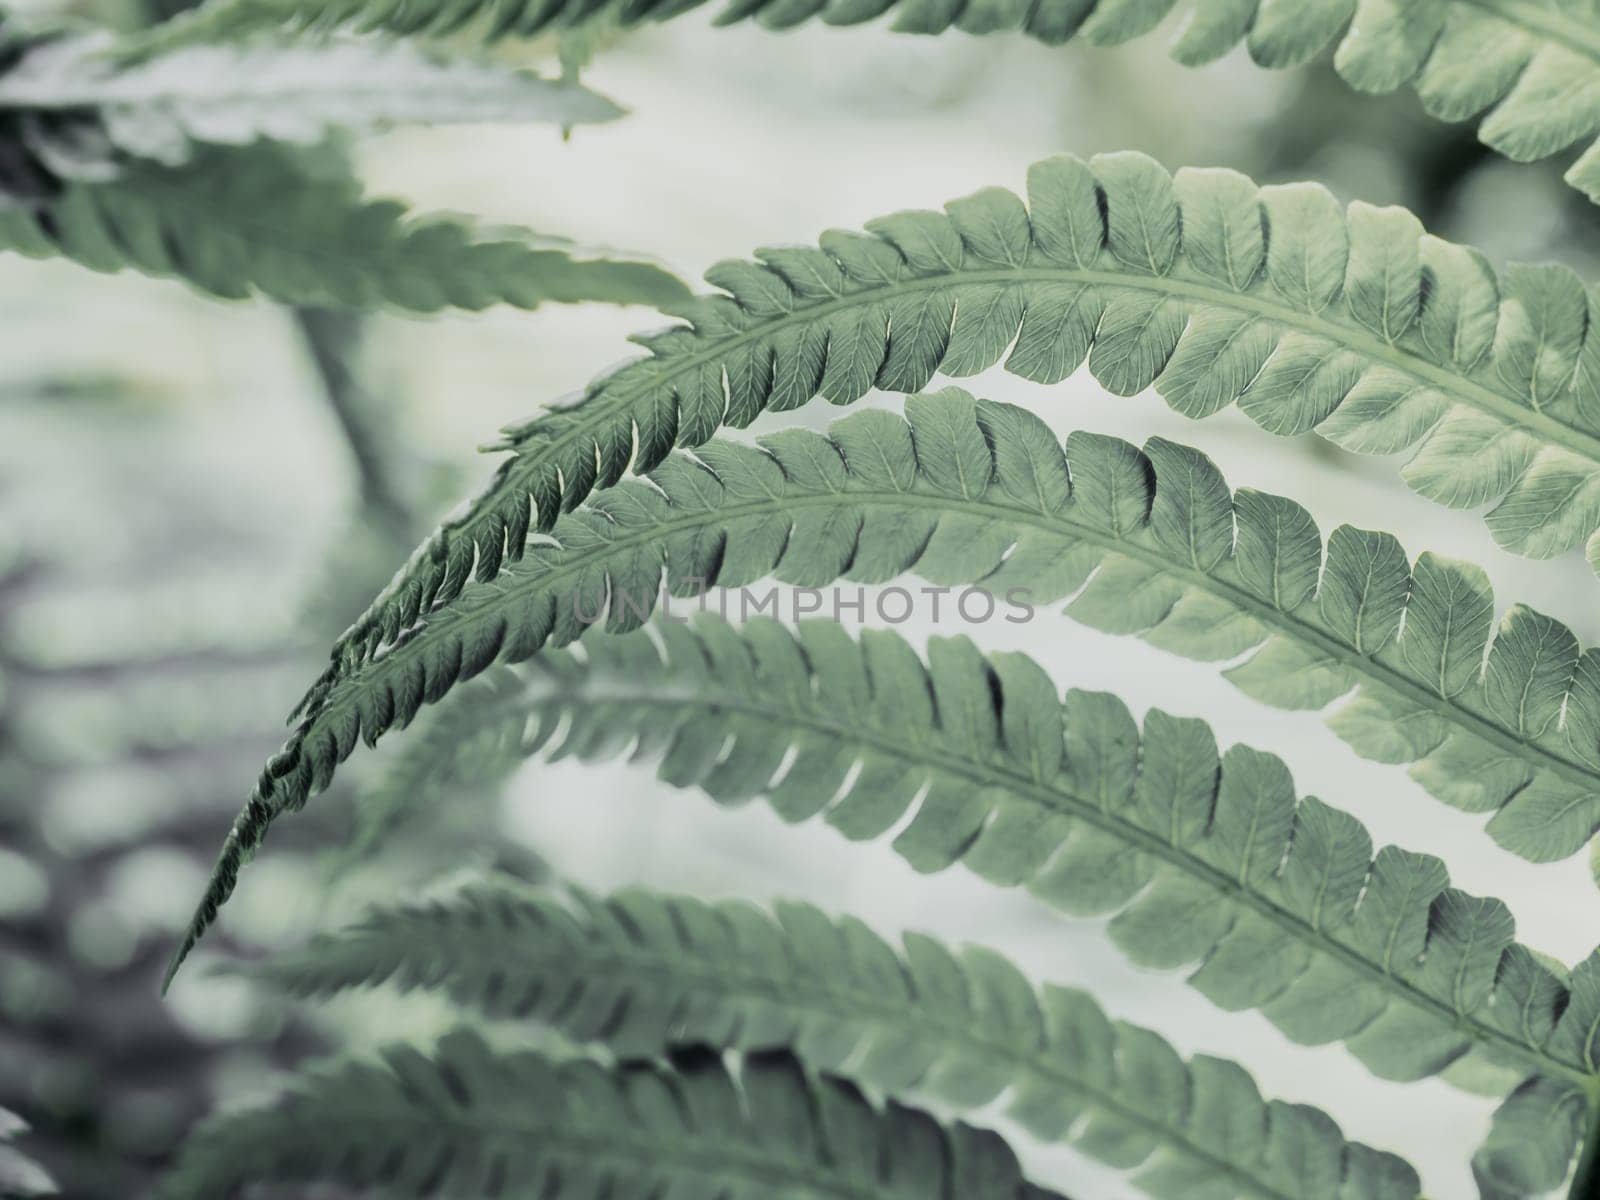 Ecology concept. Blurry pastel green fern leaf texture background looks like cosmic jungle. Soft focus to unusual vibrant mint color exotic plants. Natural background for a variety of creative uses.